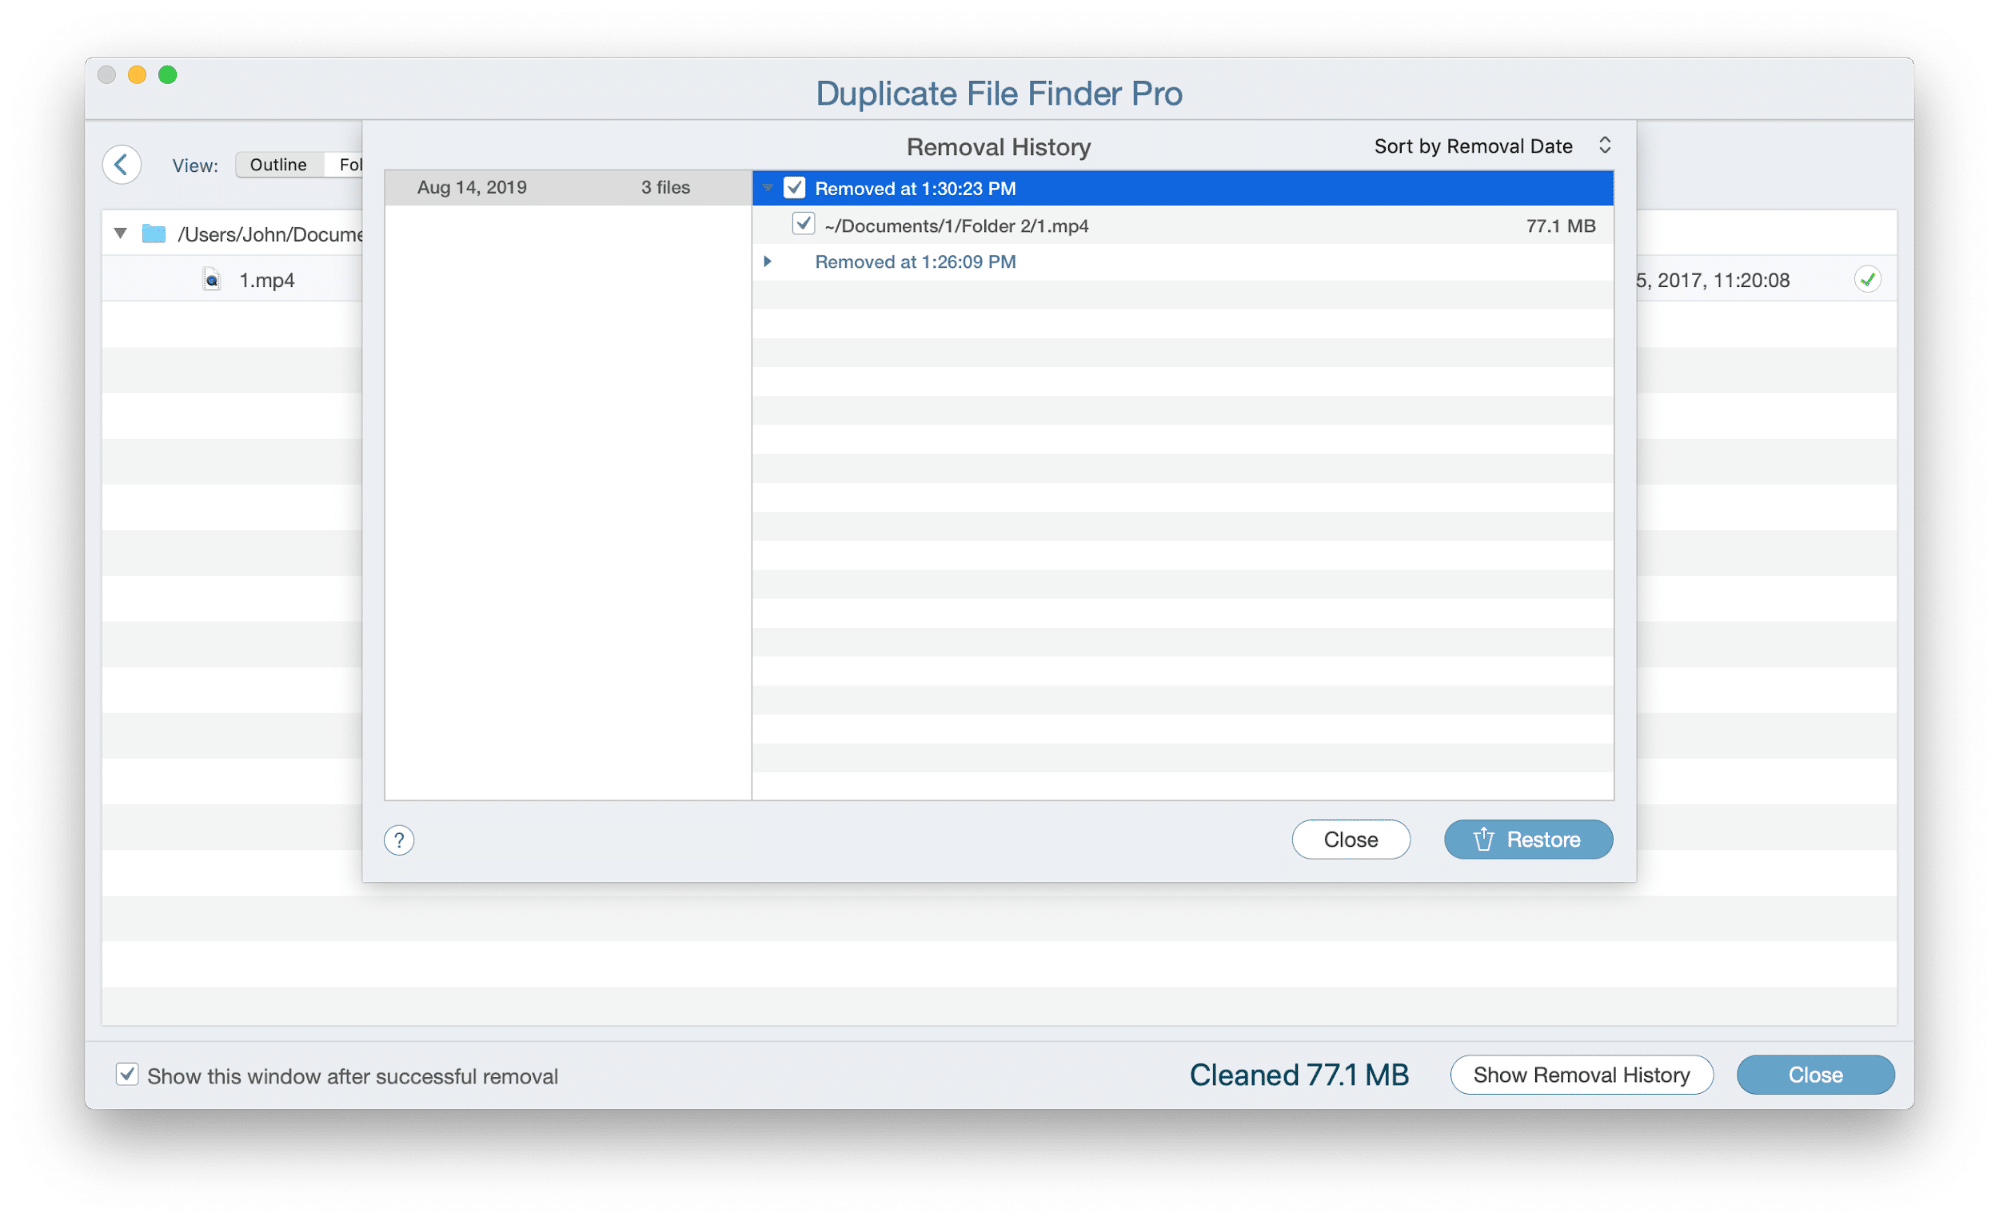 restore removed files by Duplicate File Finder